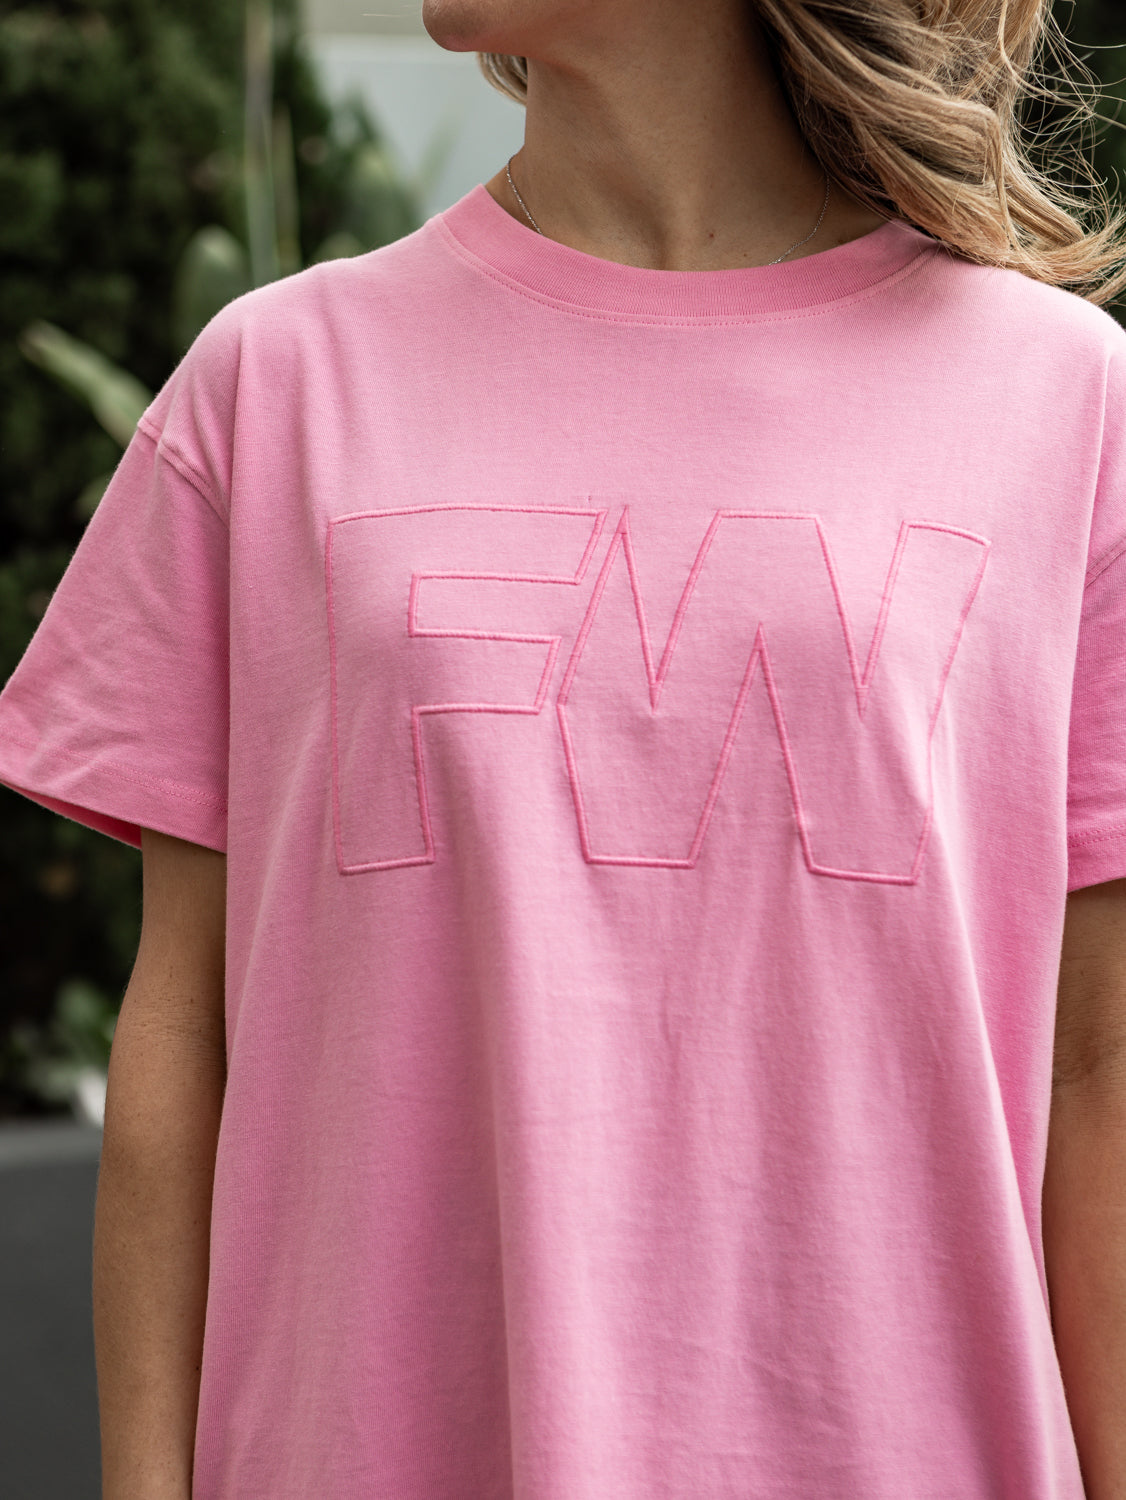 FW Embroidery Tee - Pink